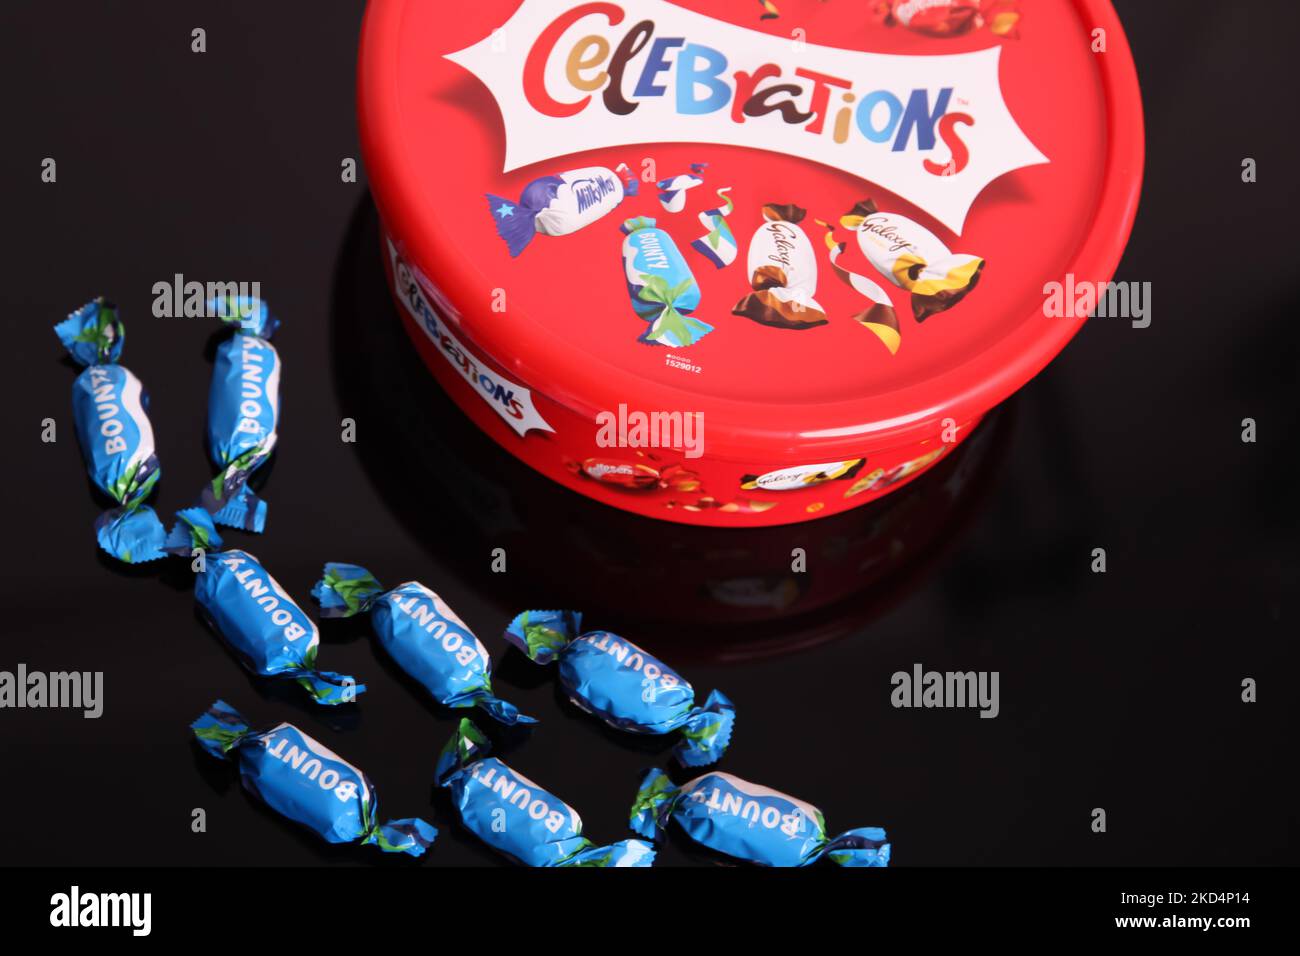 Celebration Bounty chocolate bar outside a tub of Celebrations 2022, removed, left out Stock Photo